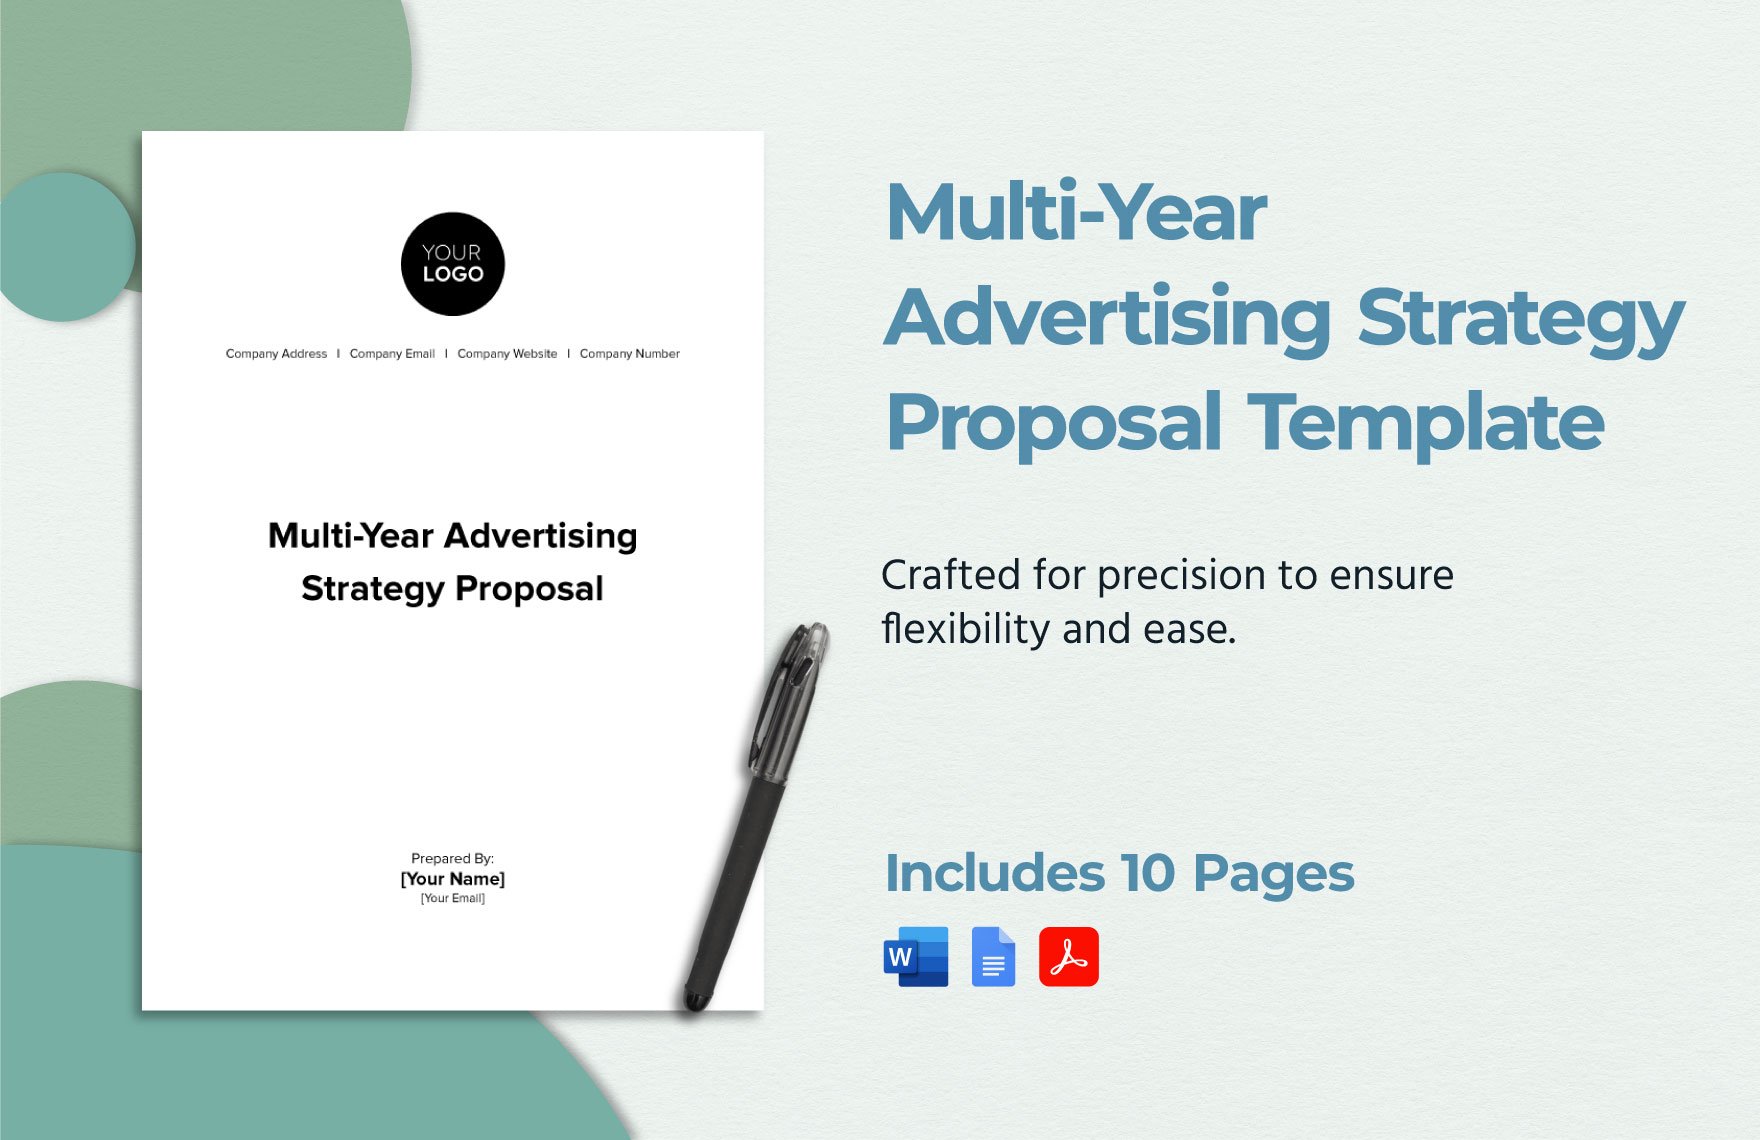 Multi-Year Advertising Strategy Proposal Template